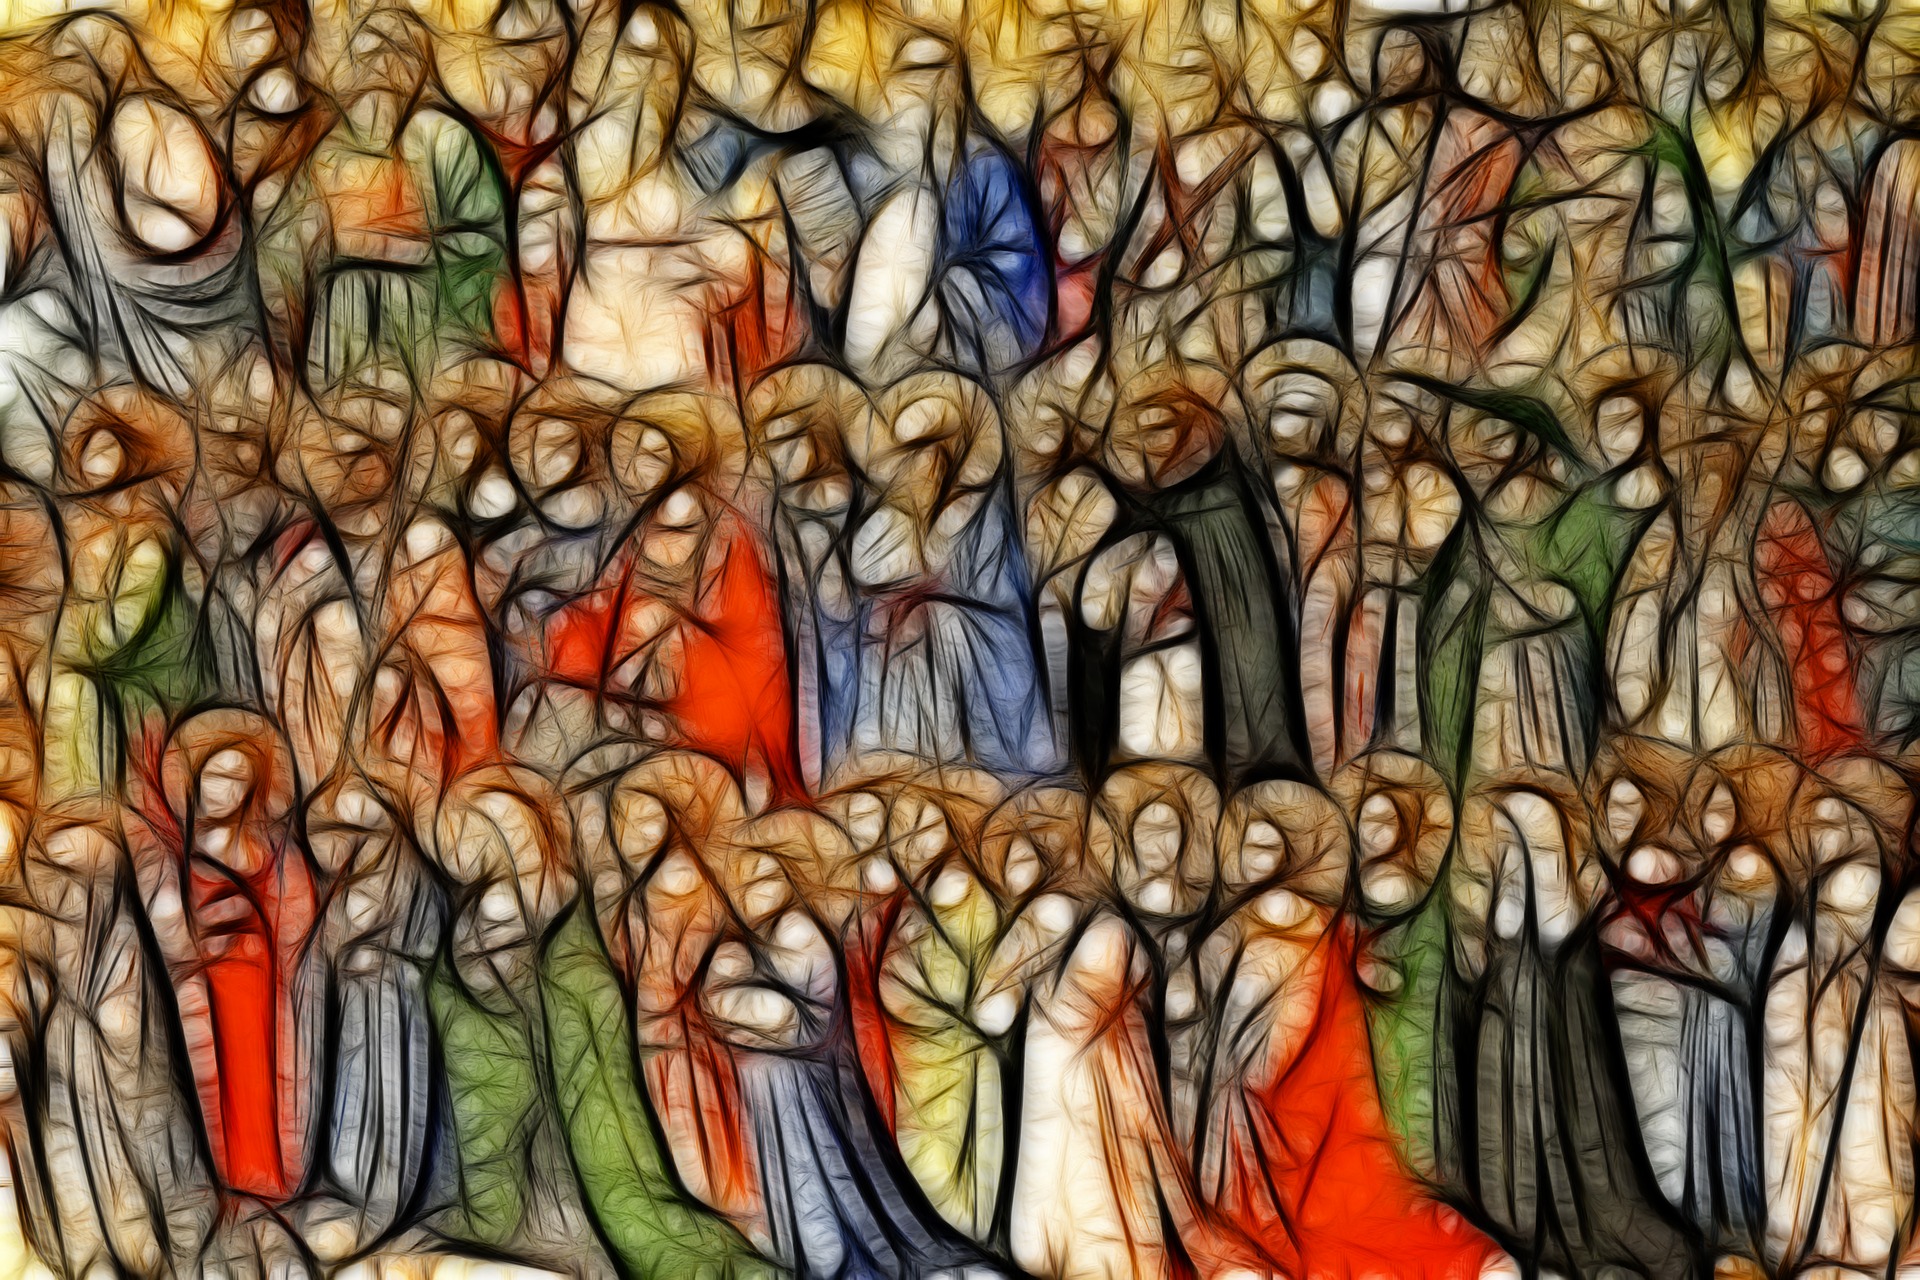 All Saints and All Souls: contemplating the life we know now and the one to come